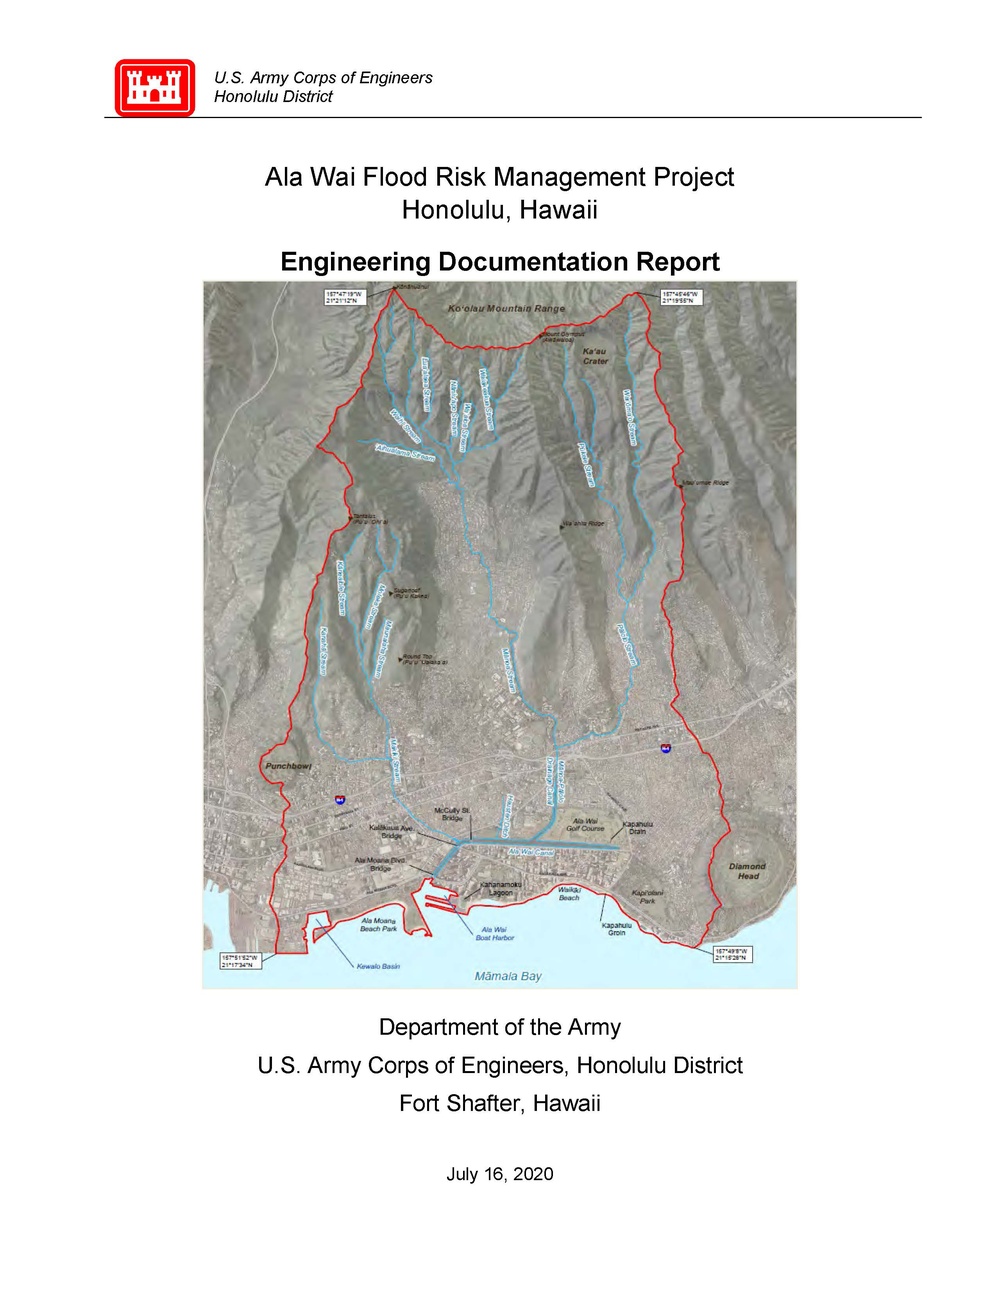 New recommended system for Ala Wai project evaluated in technical report